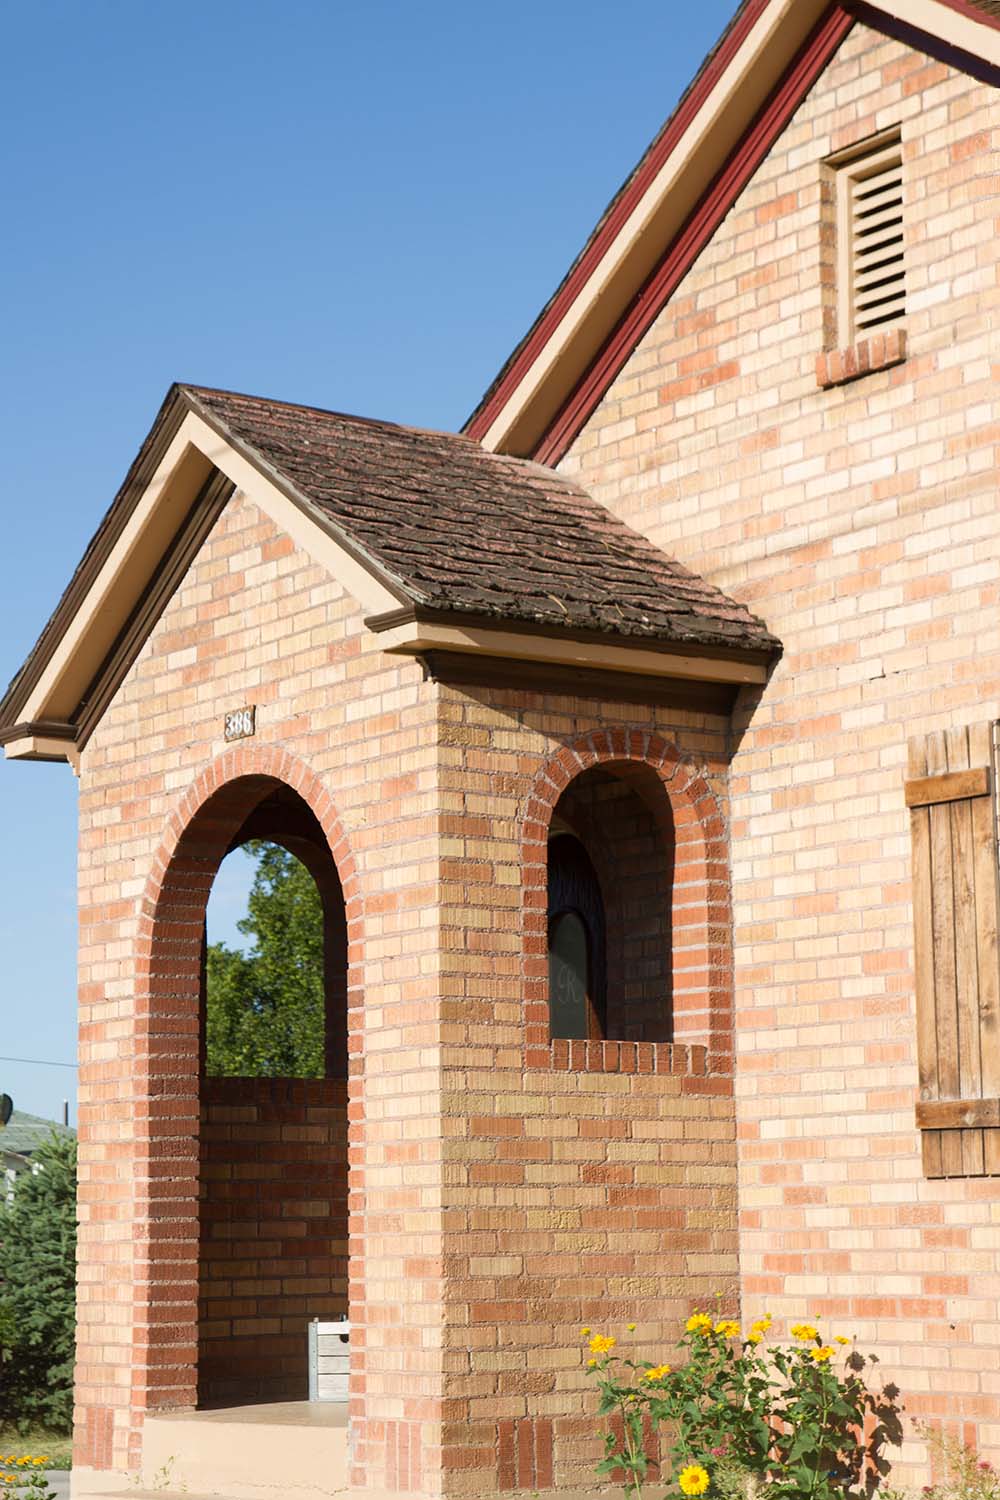 The front of a brick home with an arched entryway.